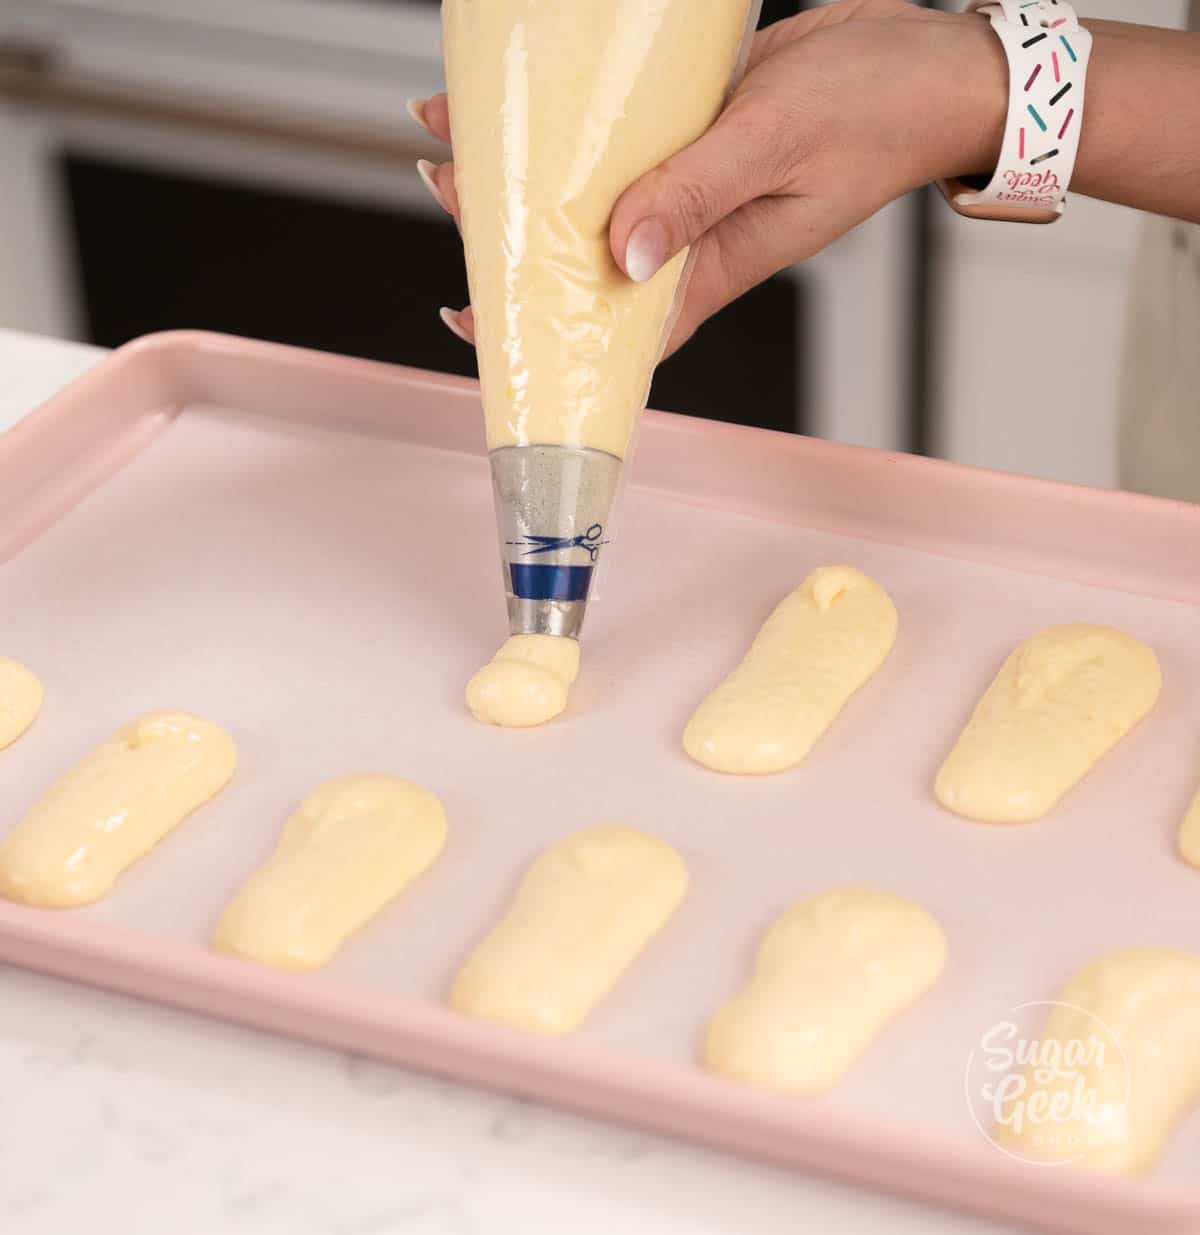 hand holding piping bag filled with batter piping cookies onto tray.